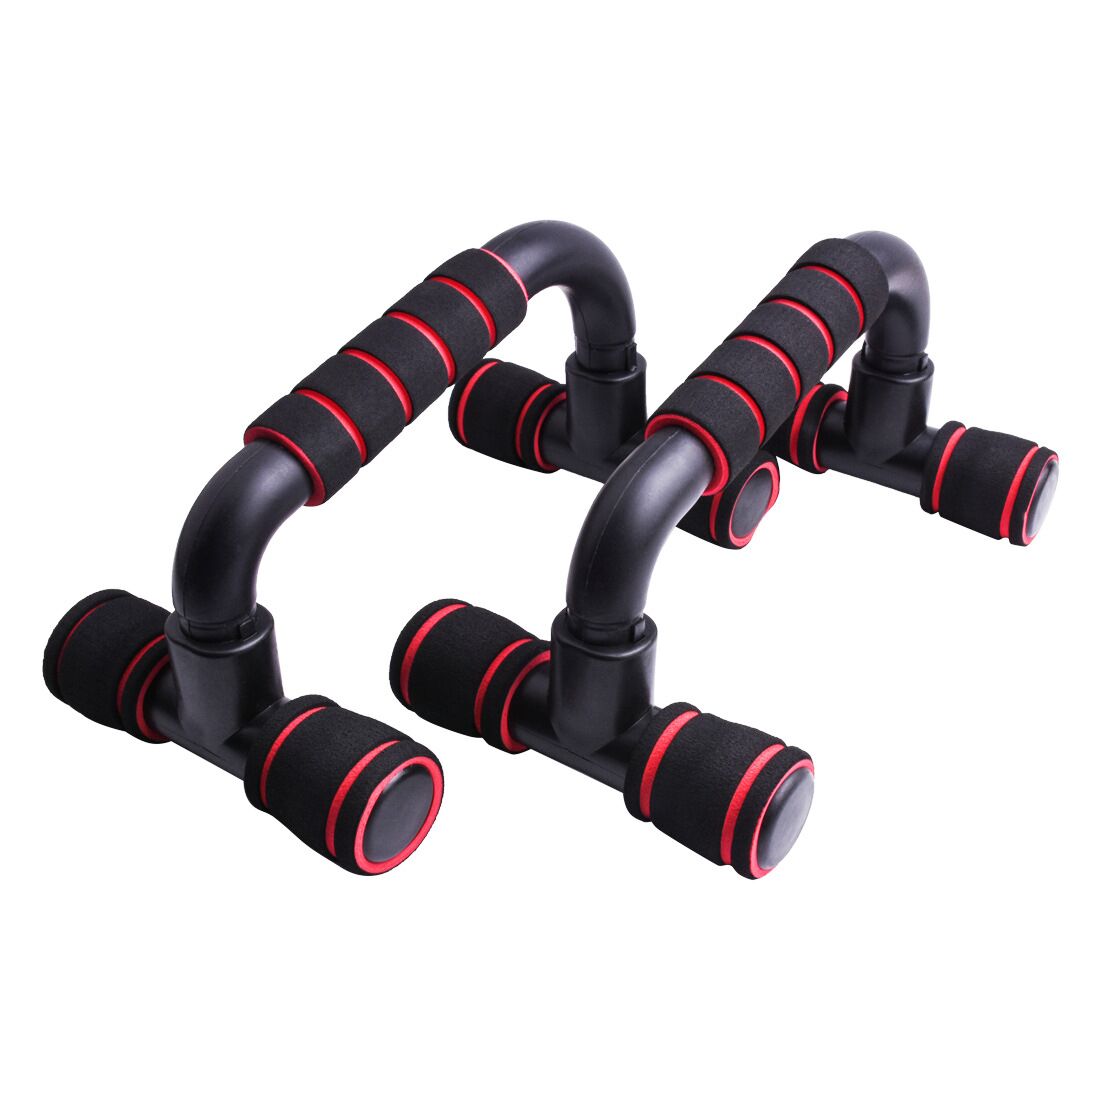 1pair I-shaped Push-up Rack Fitness Equipment Hand Sponge Grip Muscle Training Push Up Bar Chest Home Gym Body Building